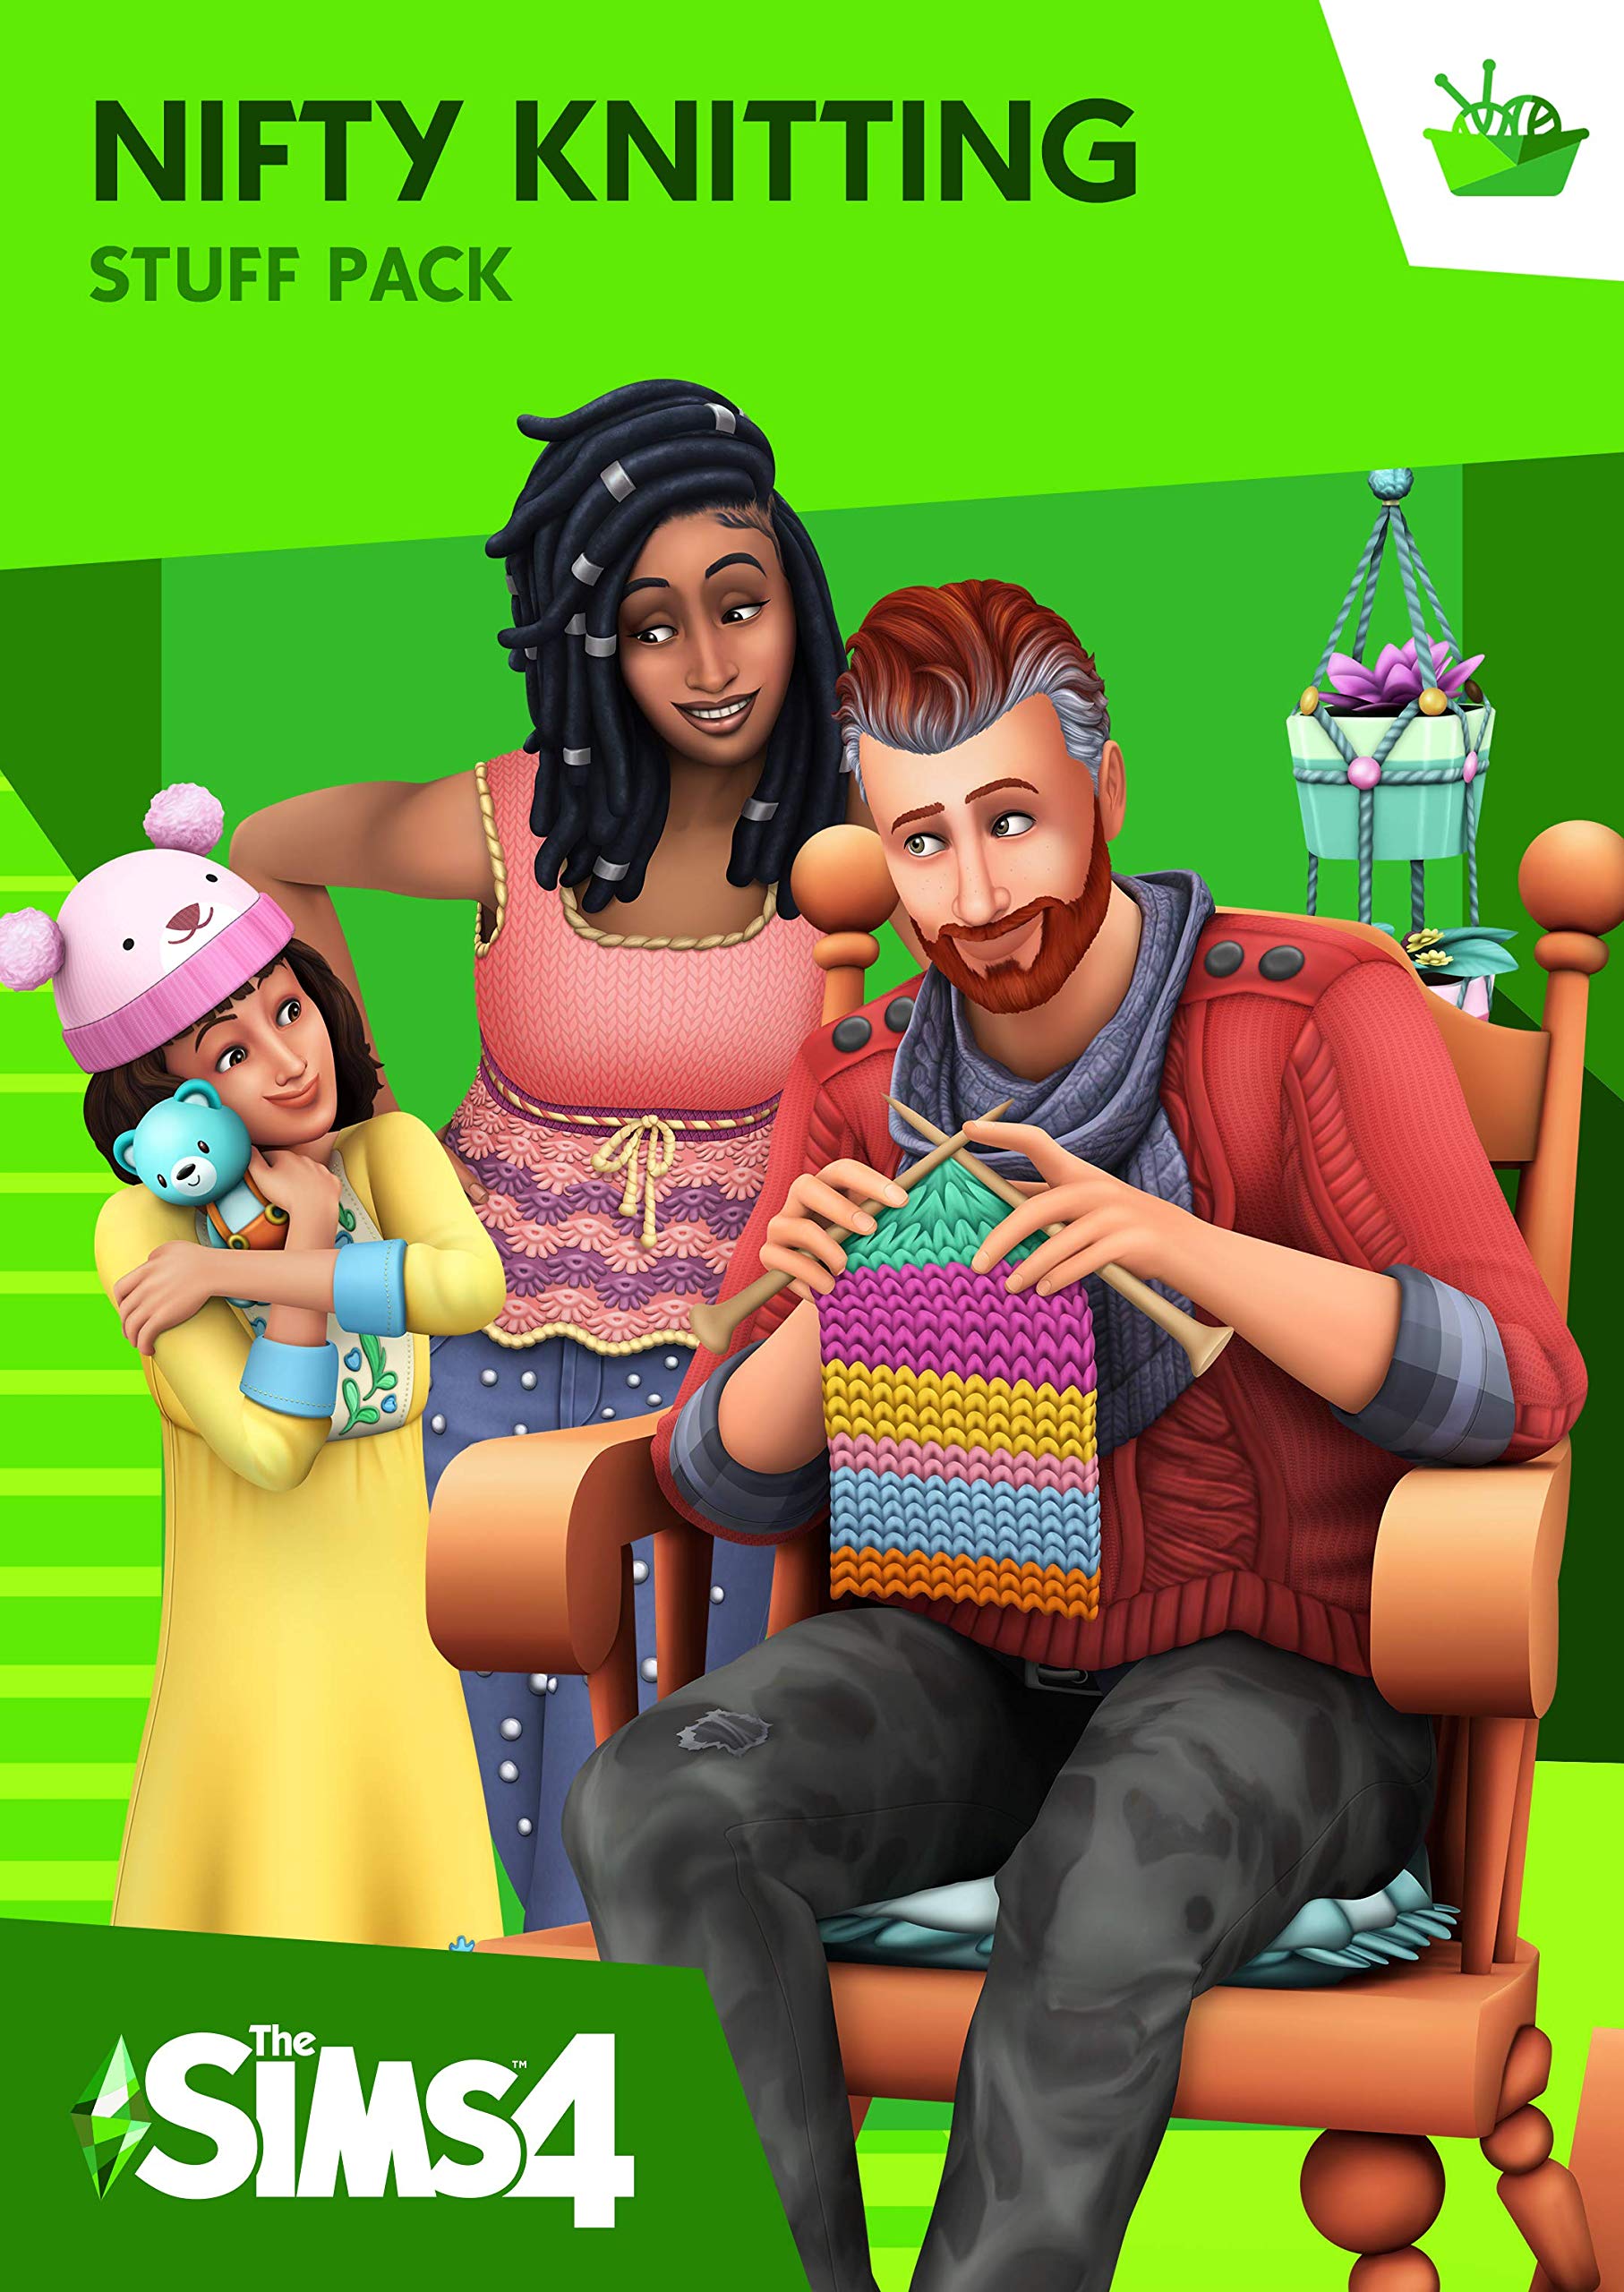 The Sims 4 - Nifty Knitting Stuff Pack - Origin PC [Online Game Code]